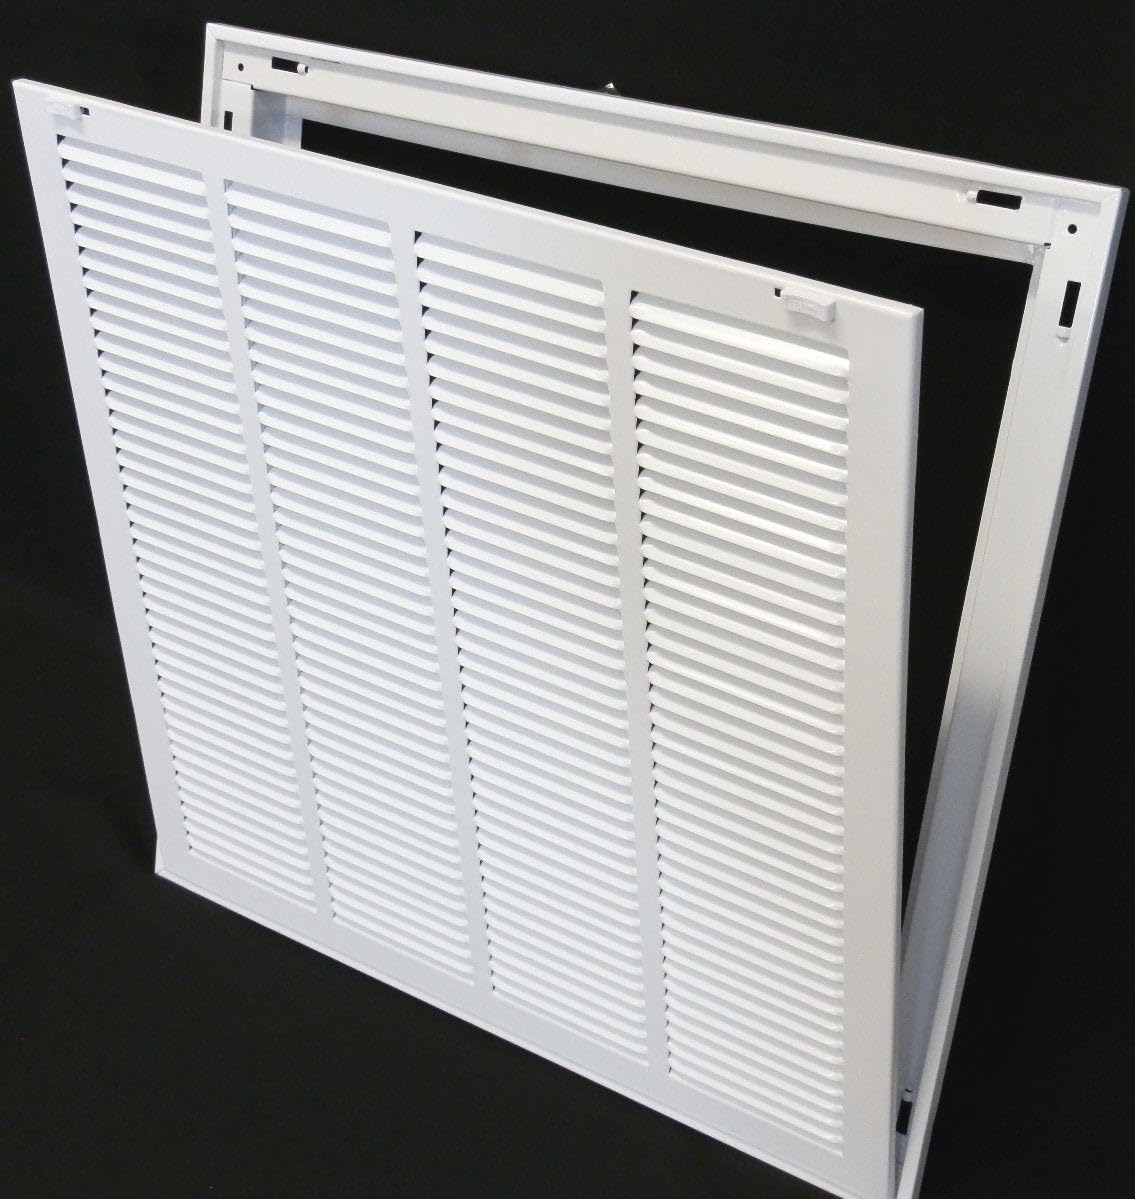 30&quot; X 8&quot; Steel Return Air Filter Grille for 1&quot; Filter - Removable Frame - [Outer Dimensions: 32 5/8&quot; X 10 5/8&quot;]